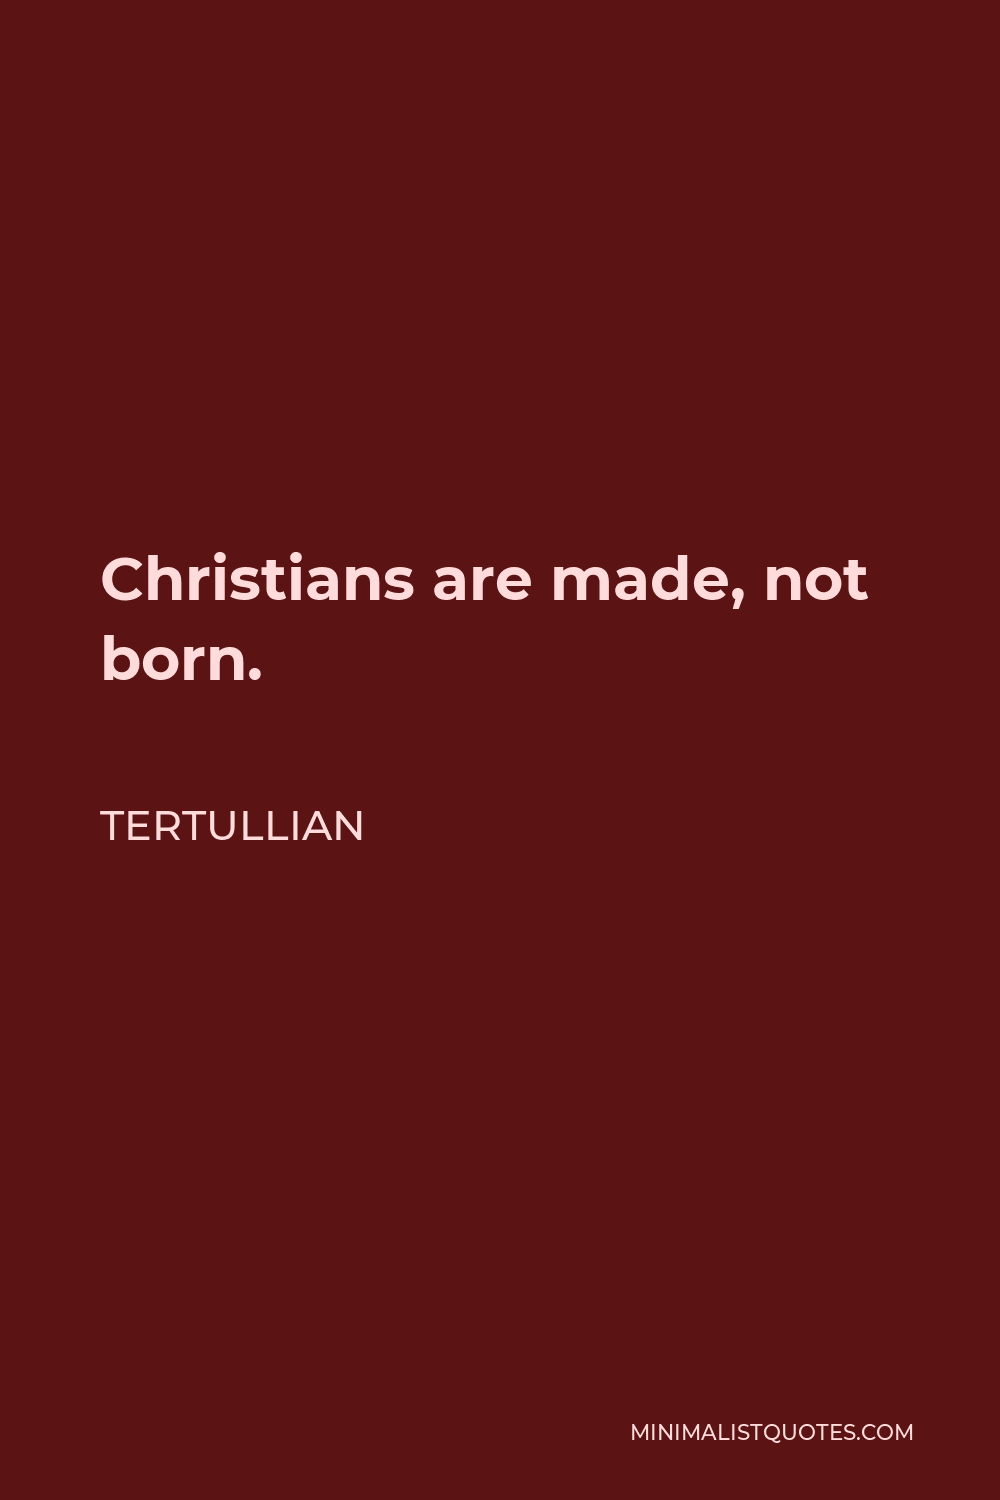 Tertullian Quote - Christians are made, not born.